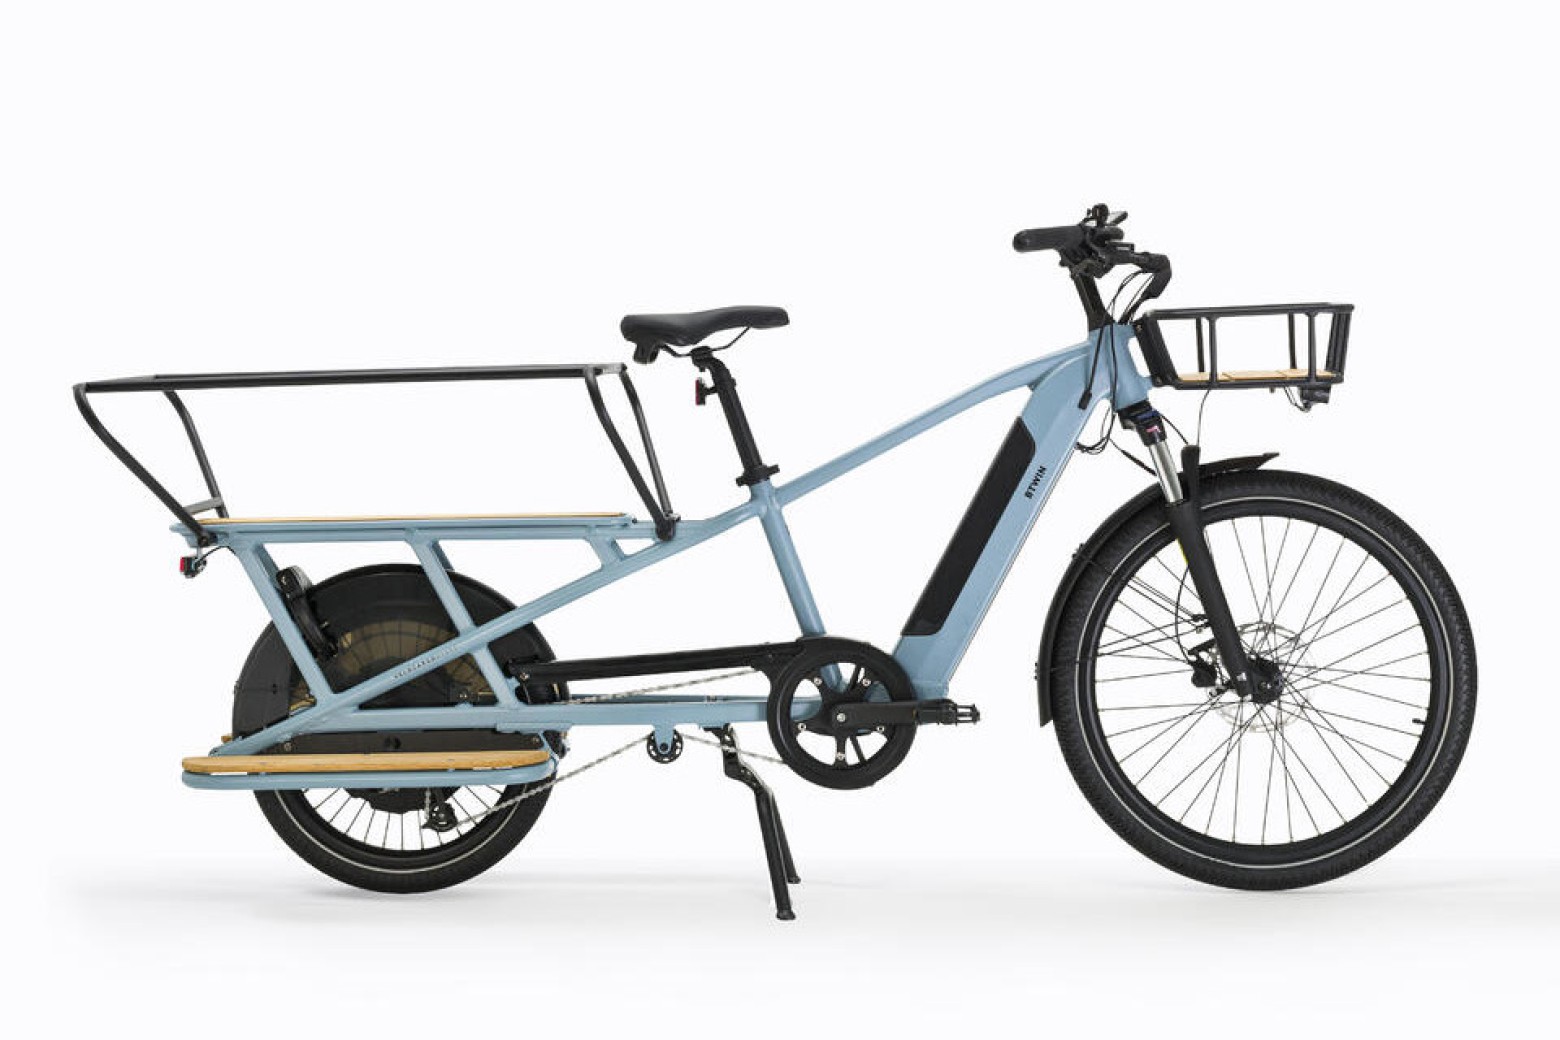 This Decathlon electric Cargo Bike can carry up to 170kg or 2 children